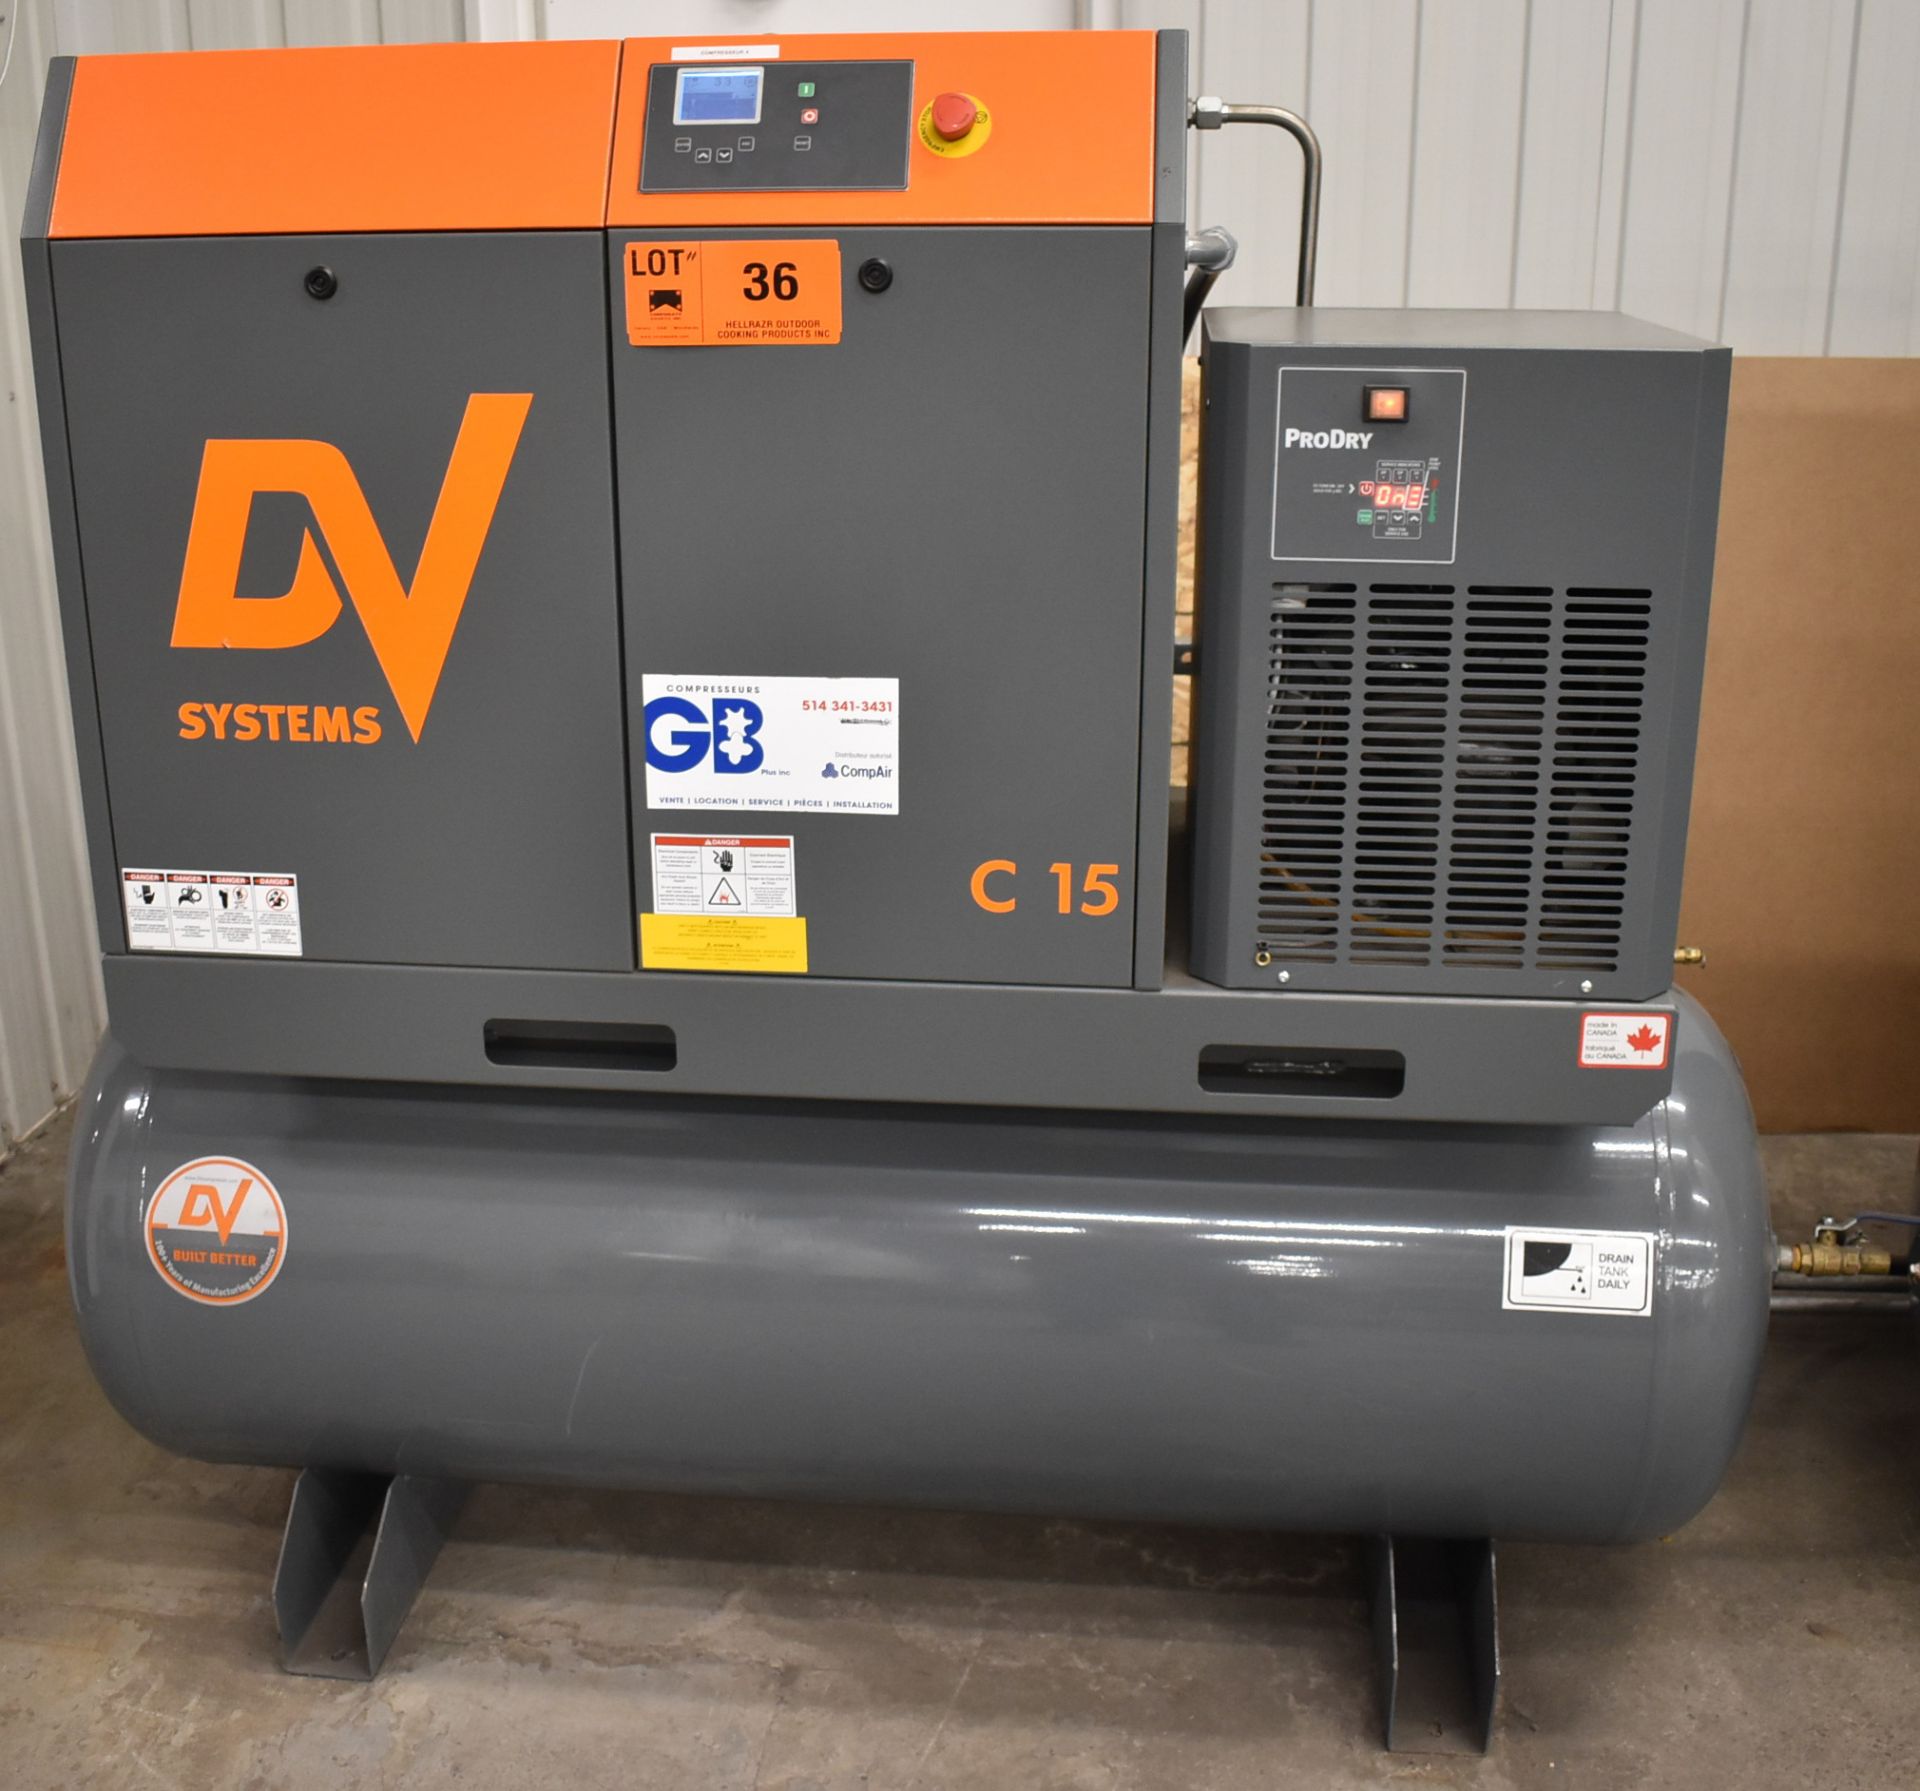 DV SYSTEMS (PURCHASED NEW IN 2020) C15TD 15 HP TANK-MOUNTED ROTARY SCREW AIR COMPRESSOR WITH PRO DRY